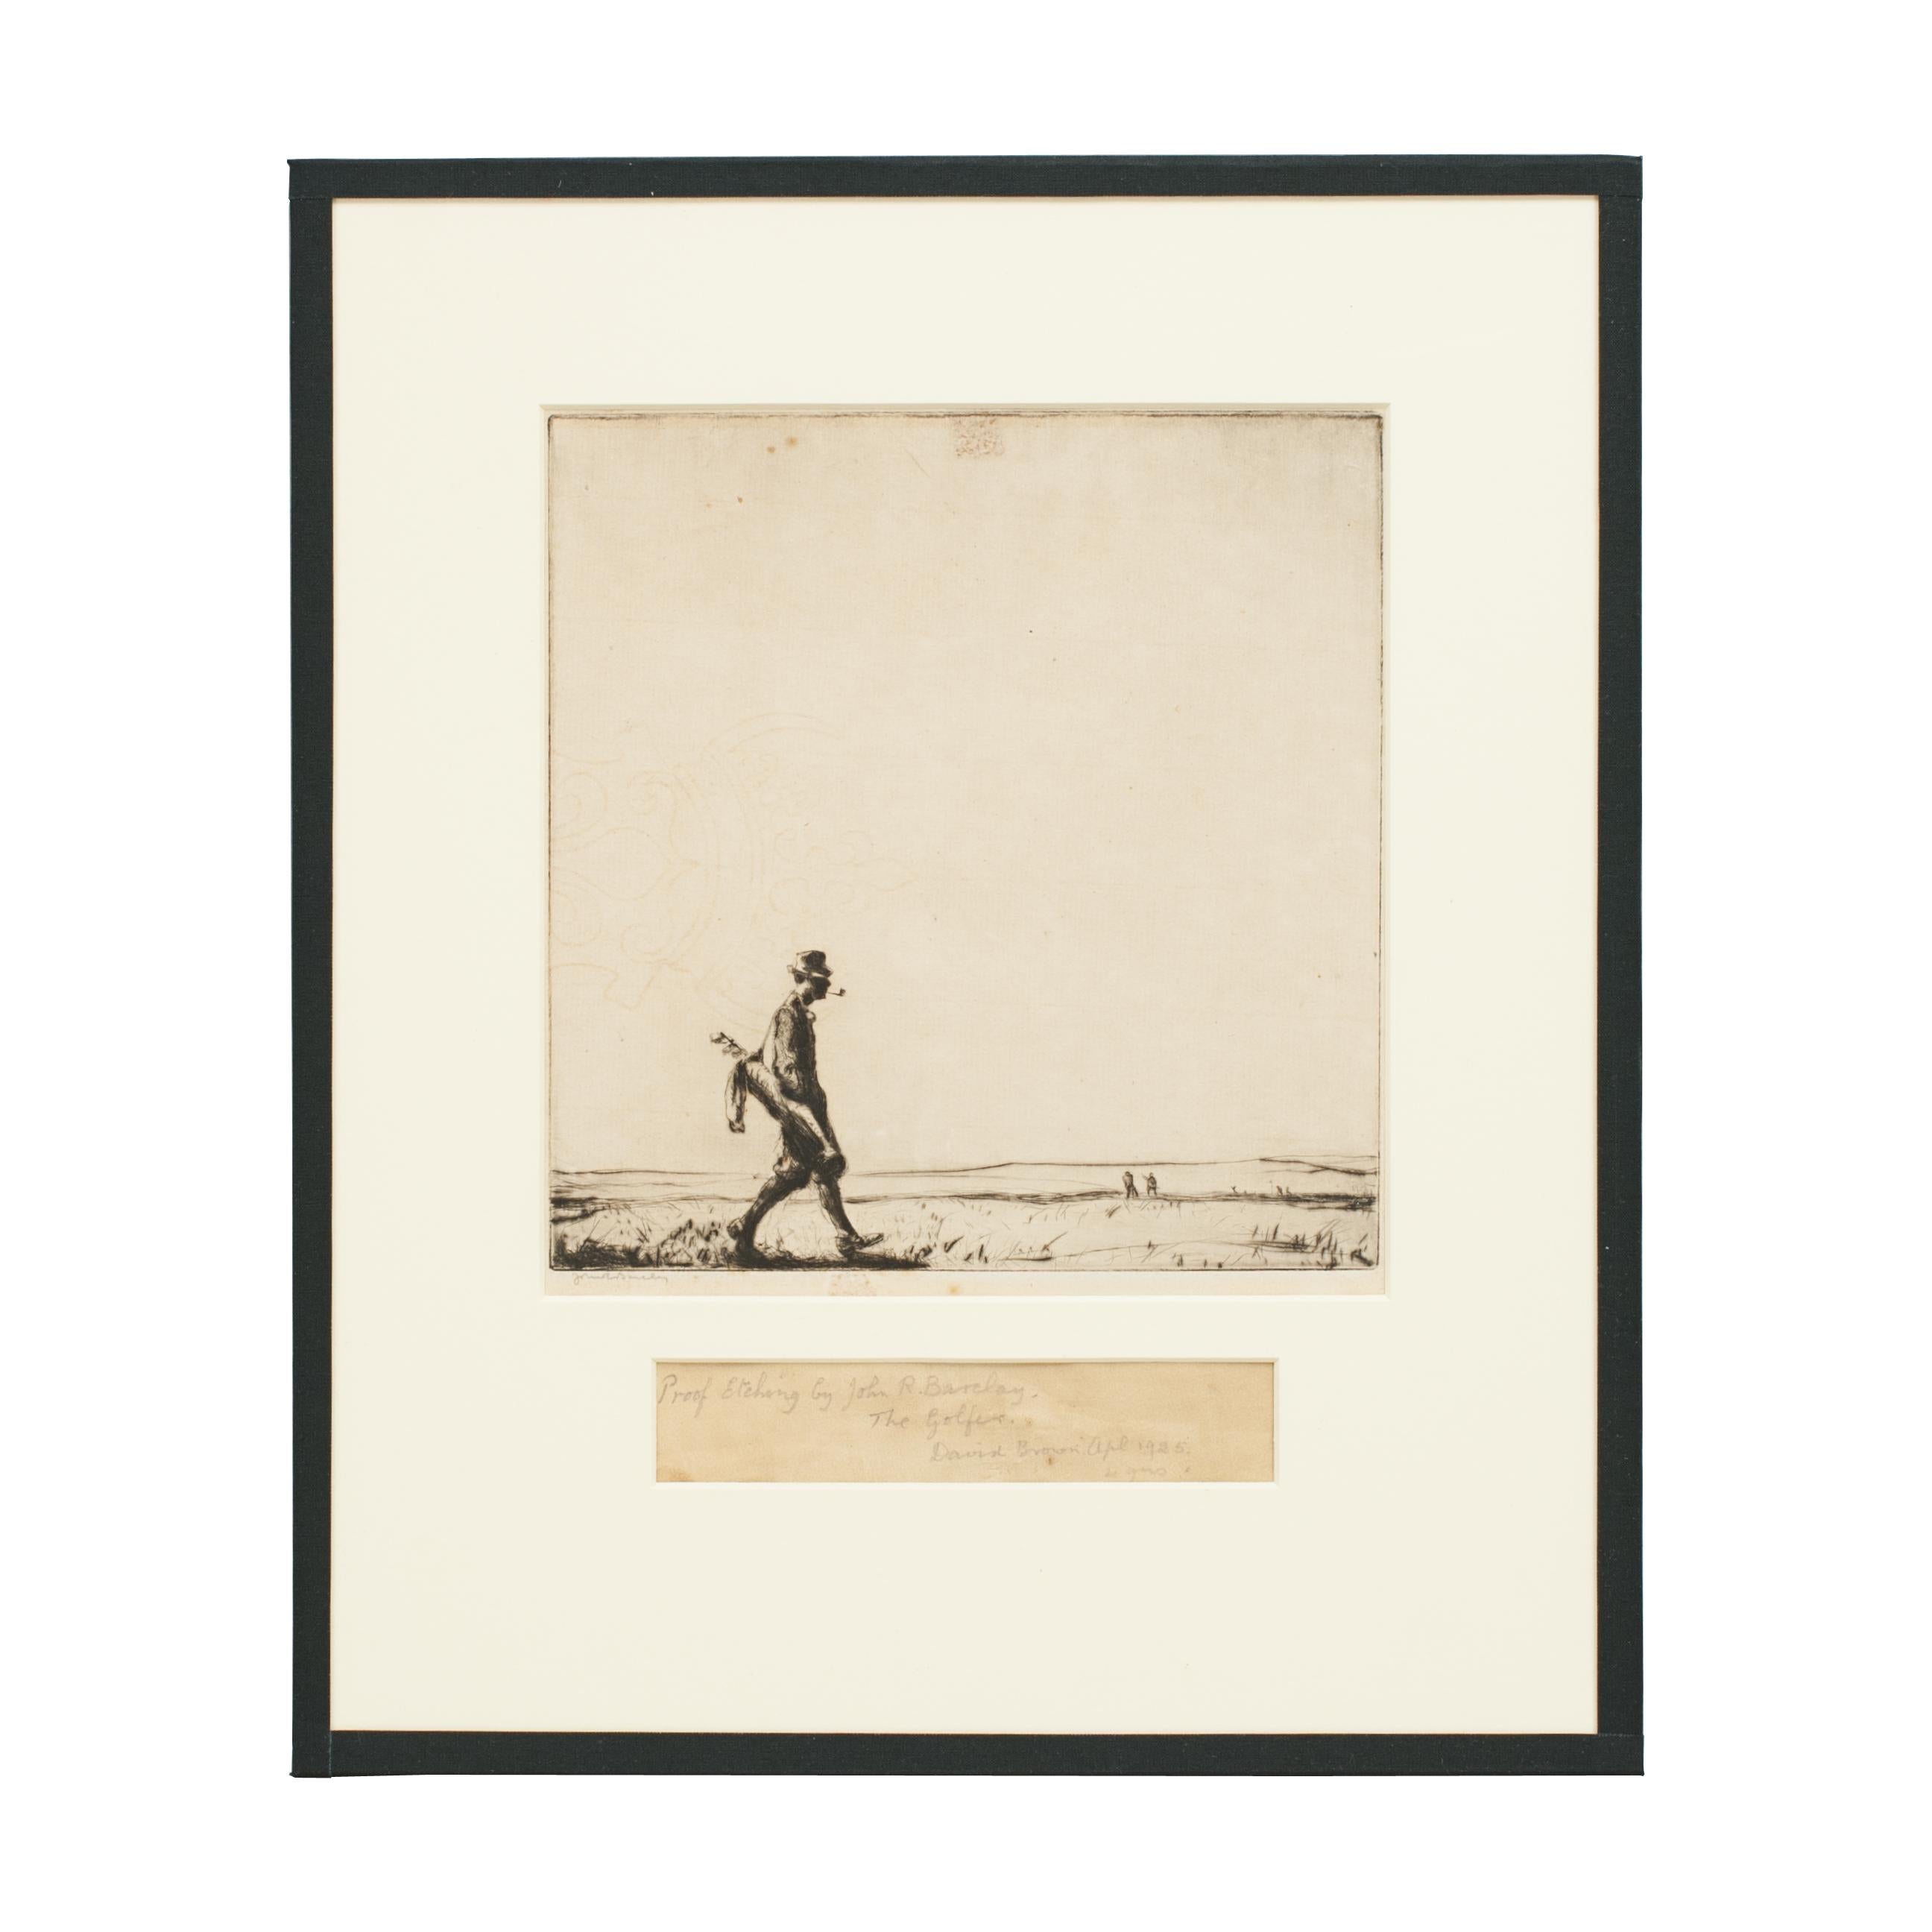 The Golfer, Etching by Barclay